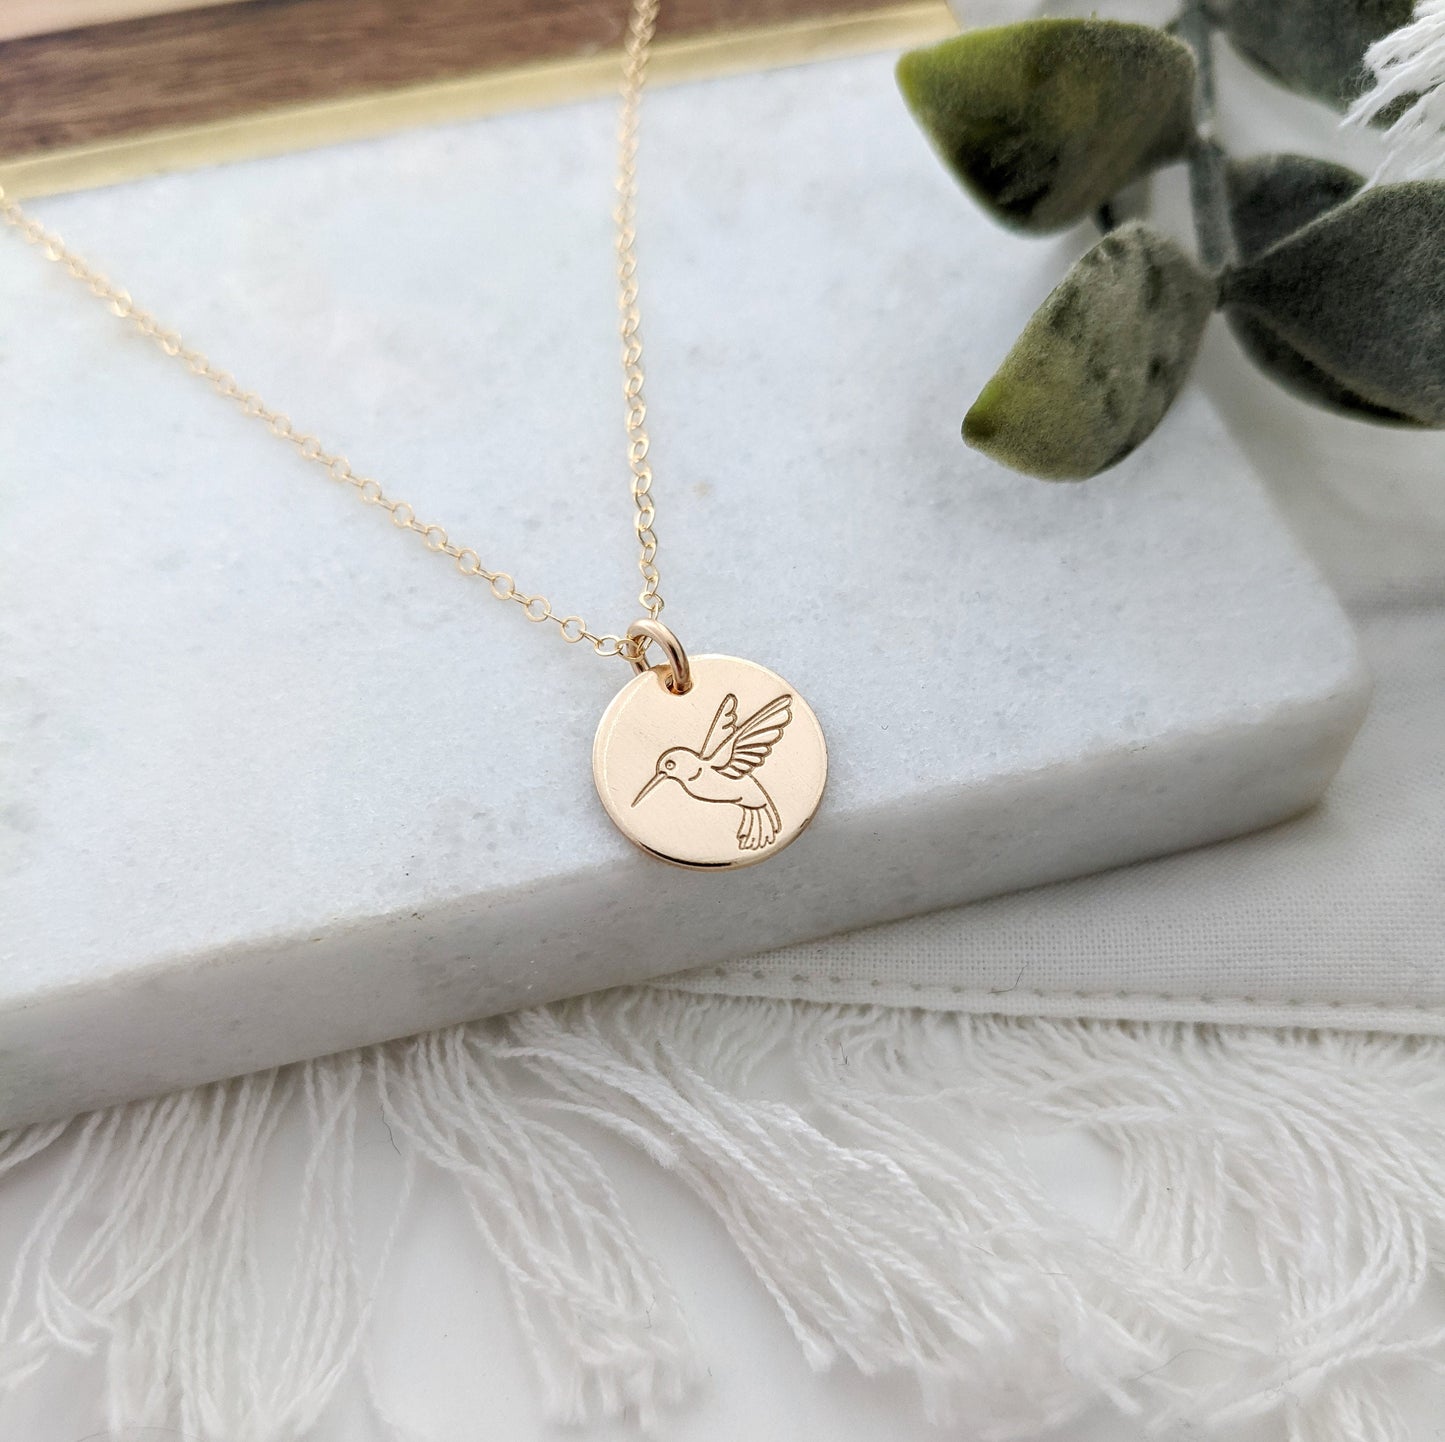 Hummingbird Necklace | Hummingbird Gift Idea | Gold Filled or Sterling Silver